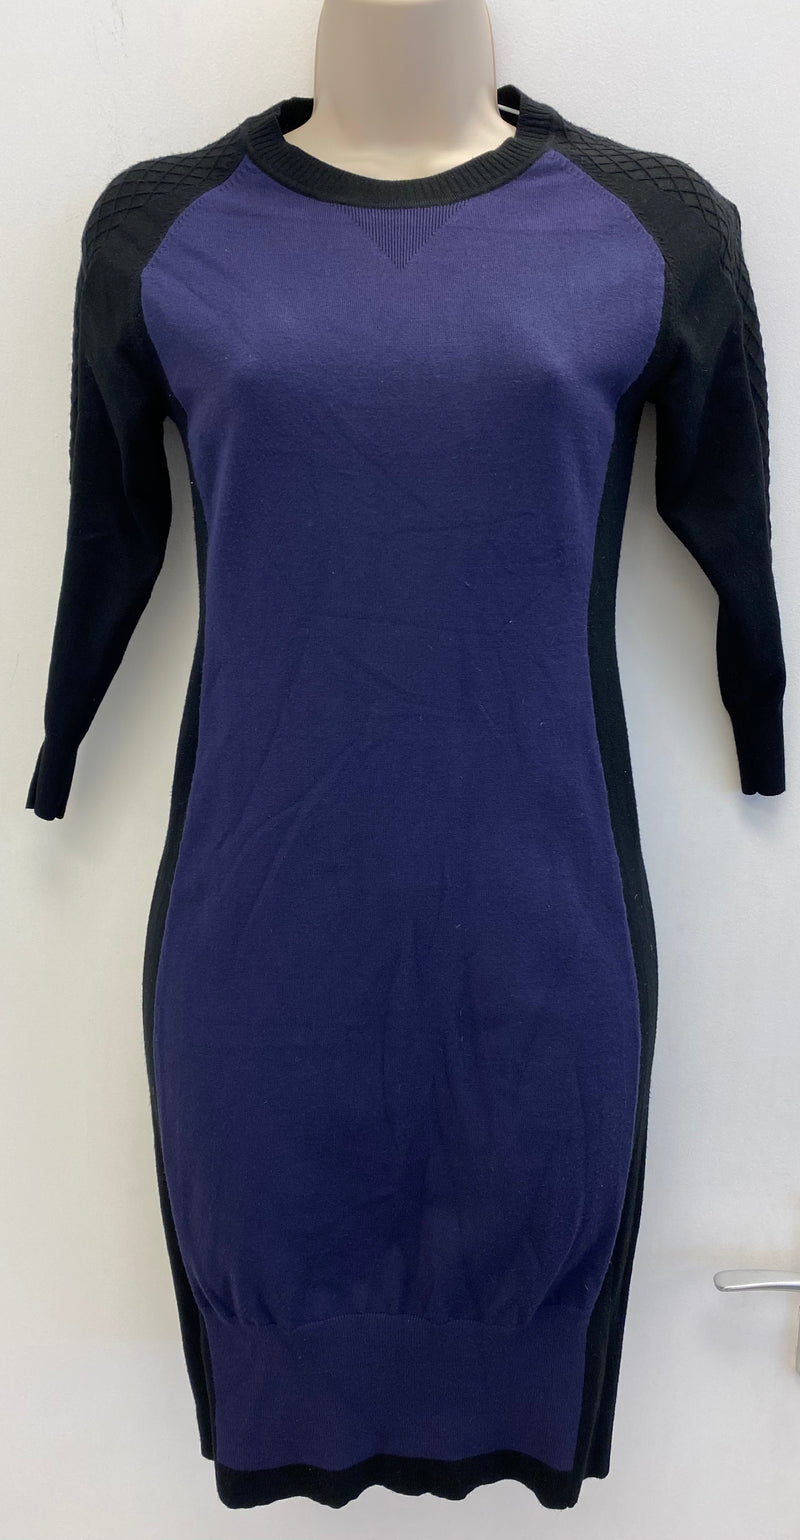 Dark Blue and Black Knit Midi Dress with Textured Sleeves UK6